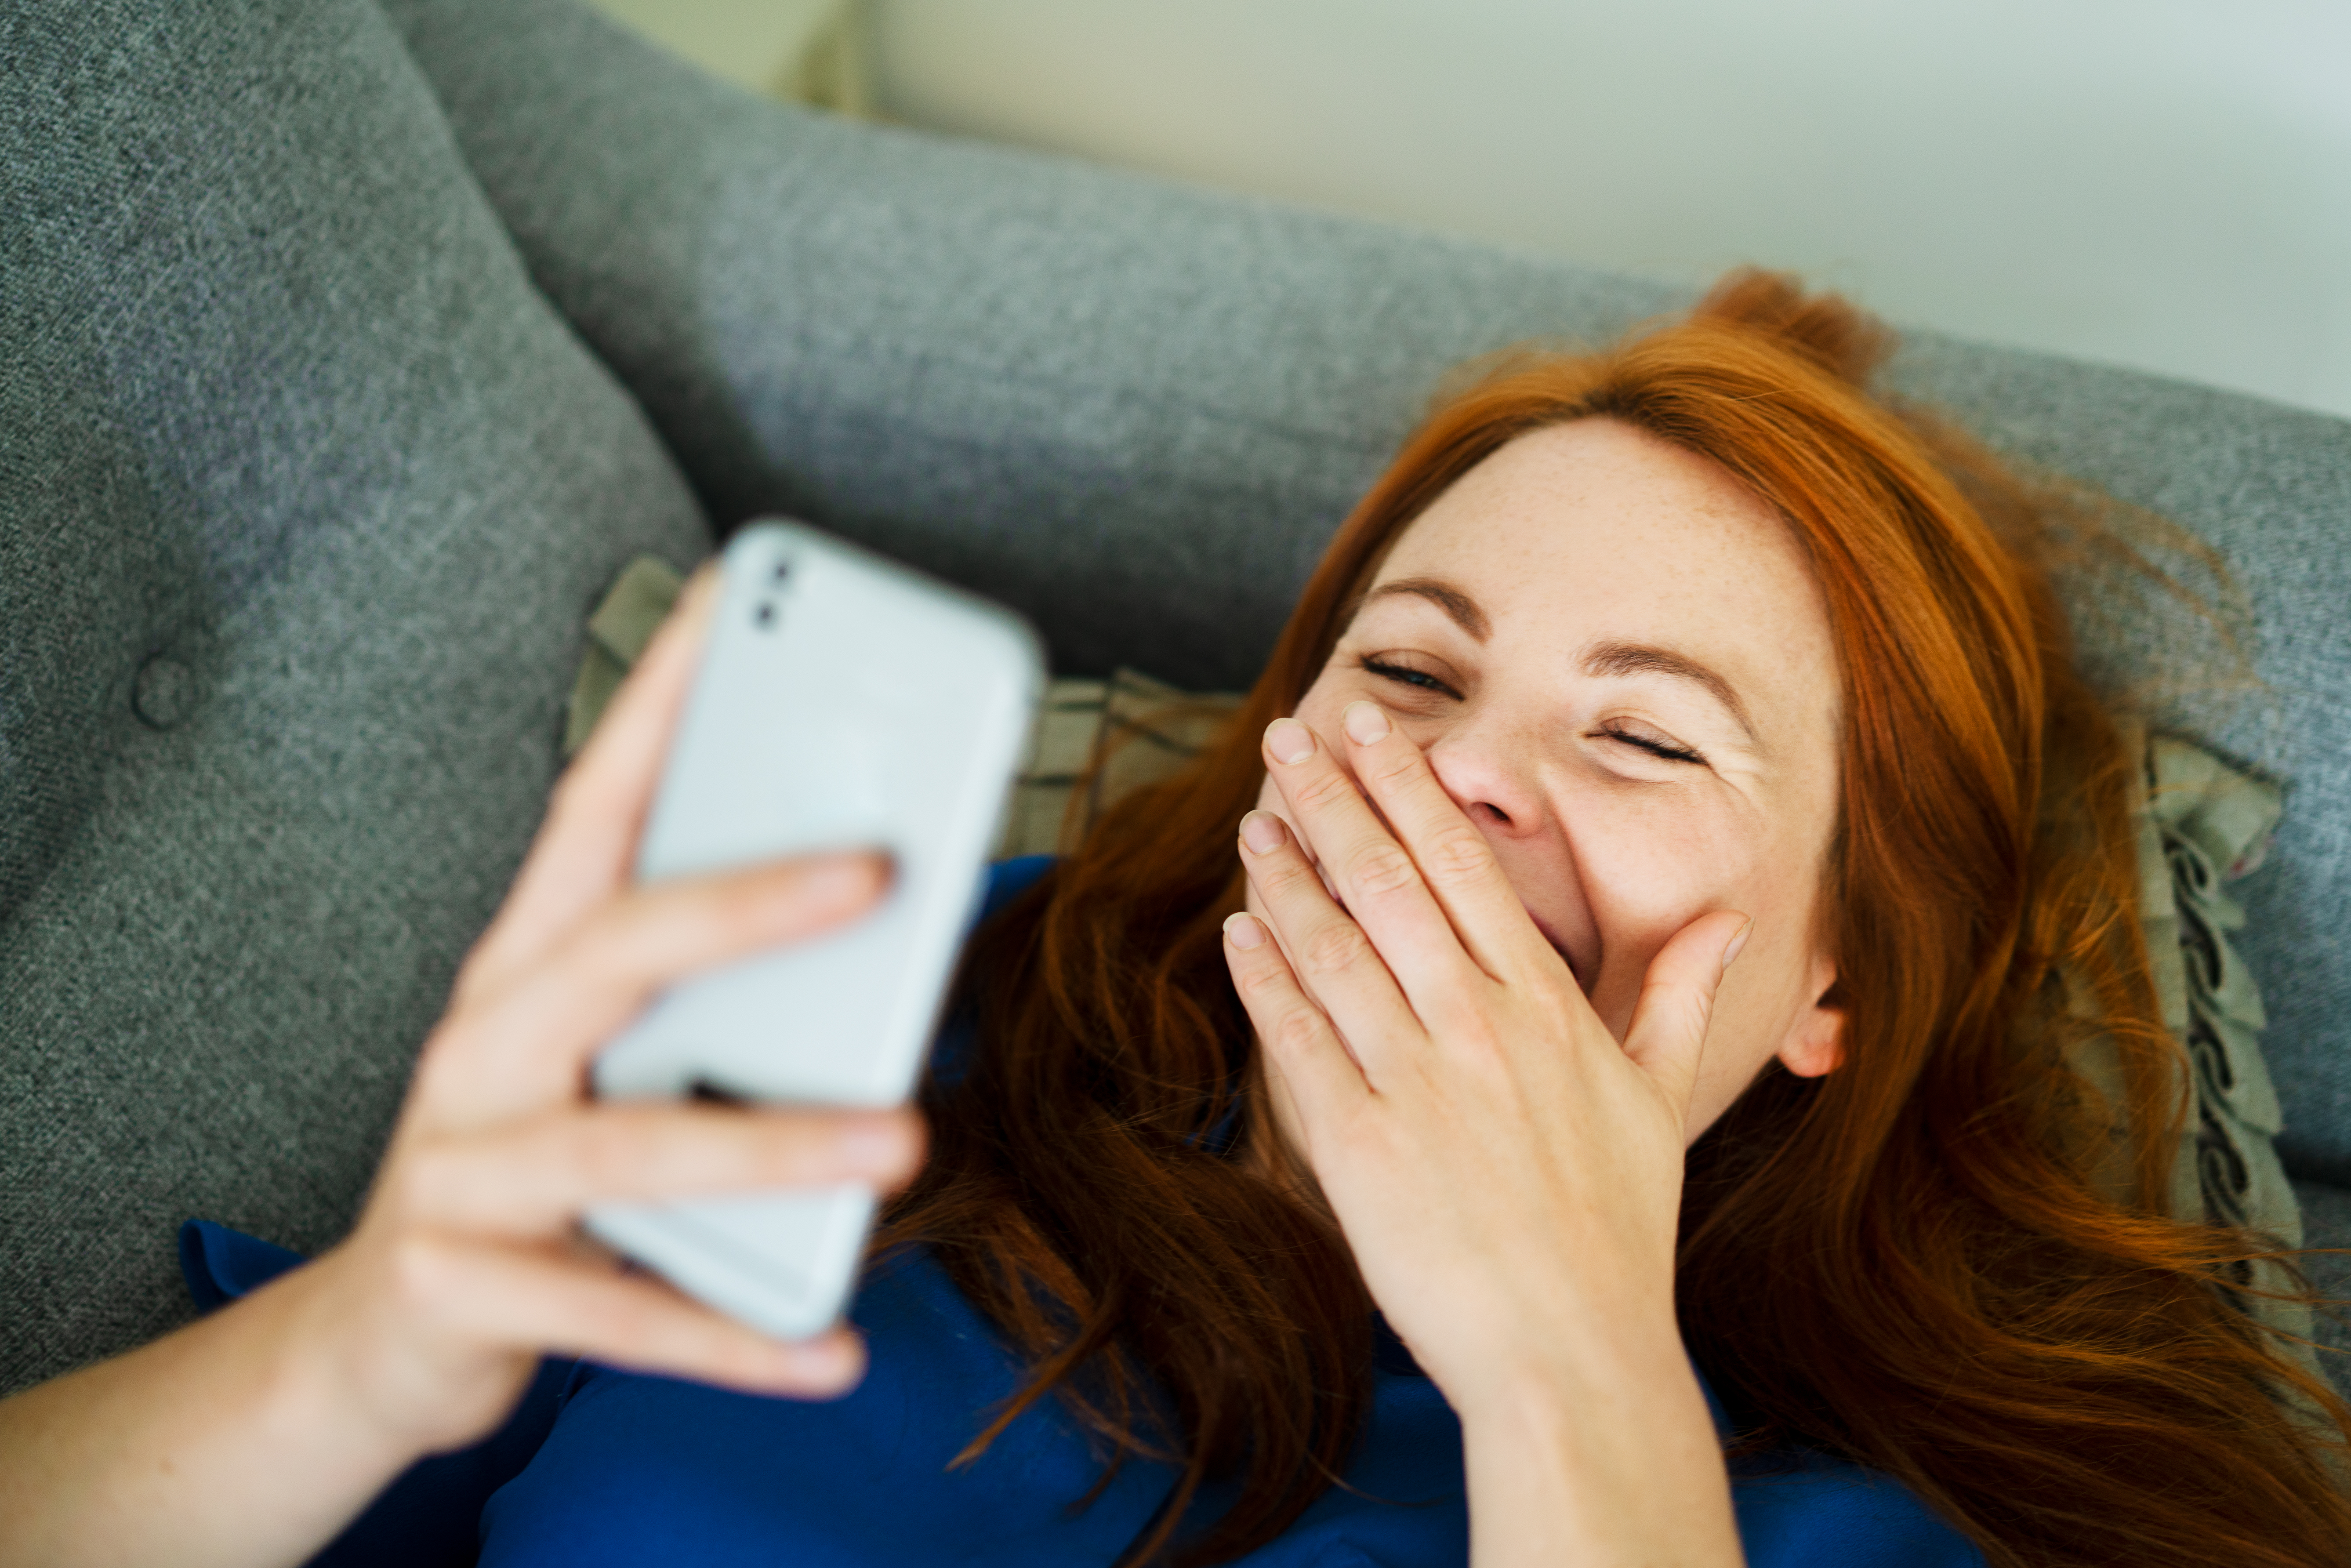 A woman laughing at her phone while lying on the sofa | Source: Getty Images